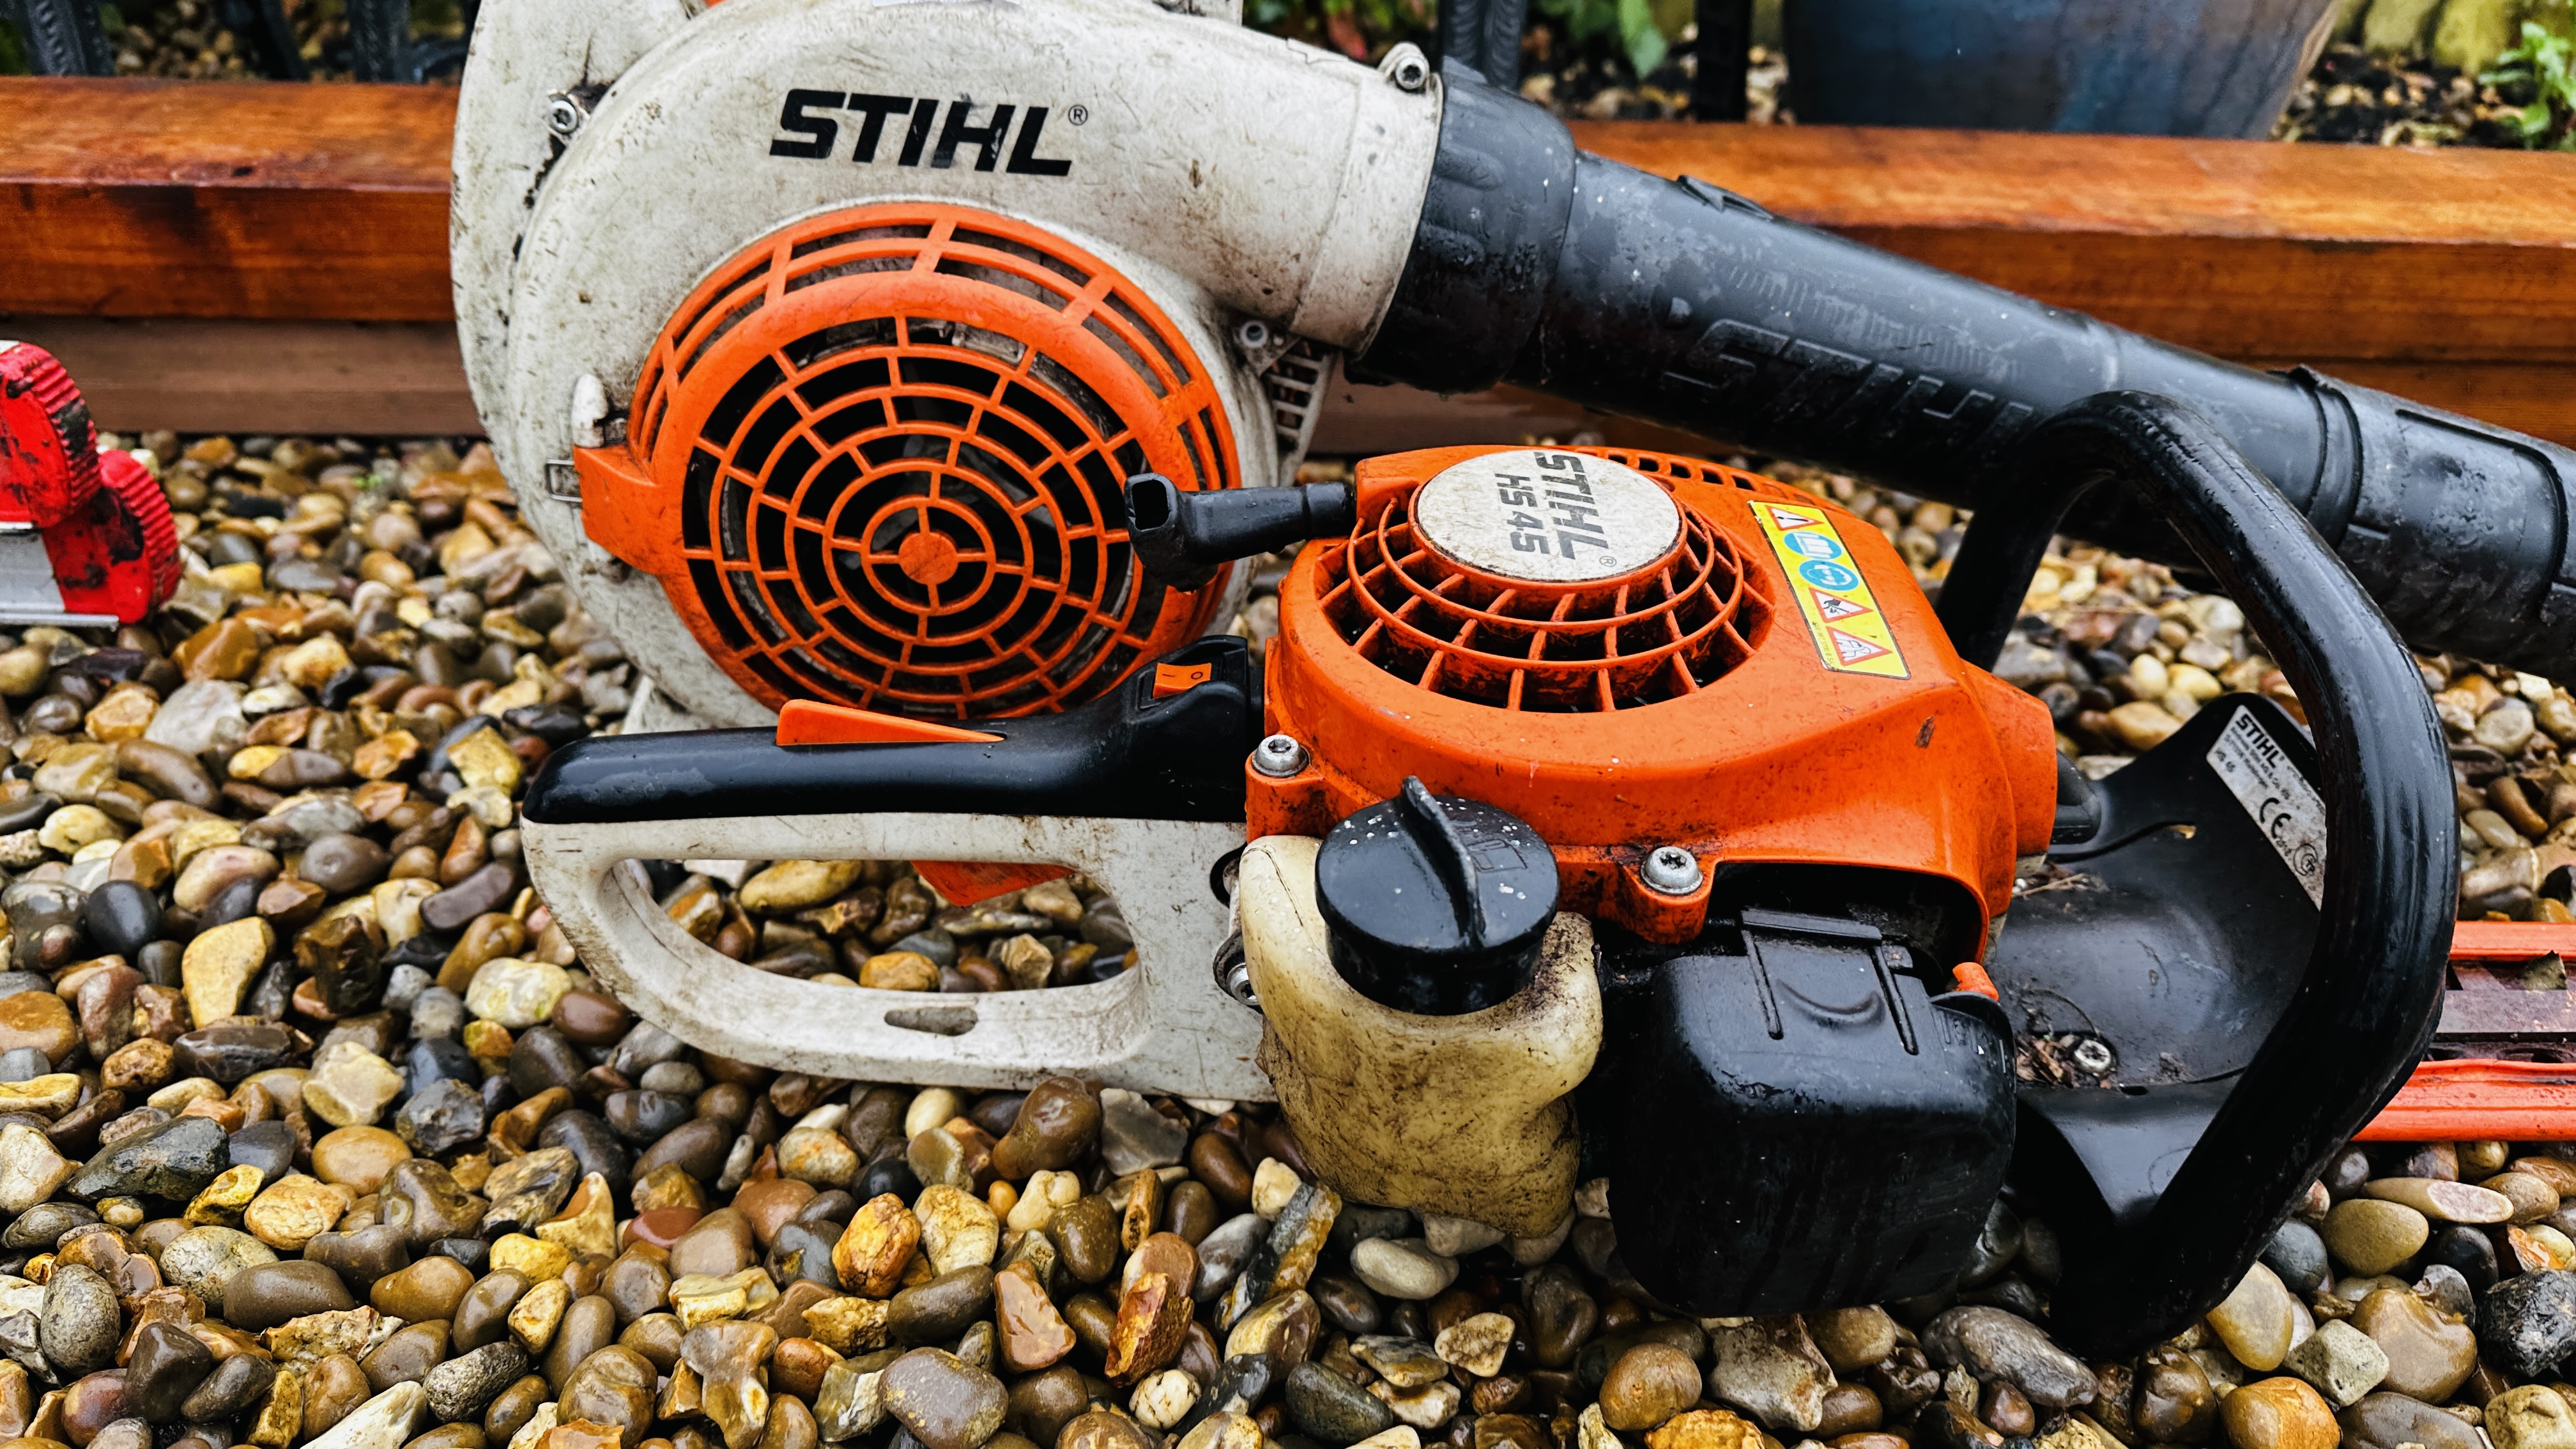 STIHL PETROL DRIVEN GARDEN BLOWER AND STIHL HS45 PETROL DRIVEN HEDGE TRIMMER - AS CLEARED, - Image 3 of 8